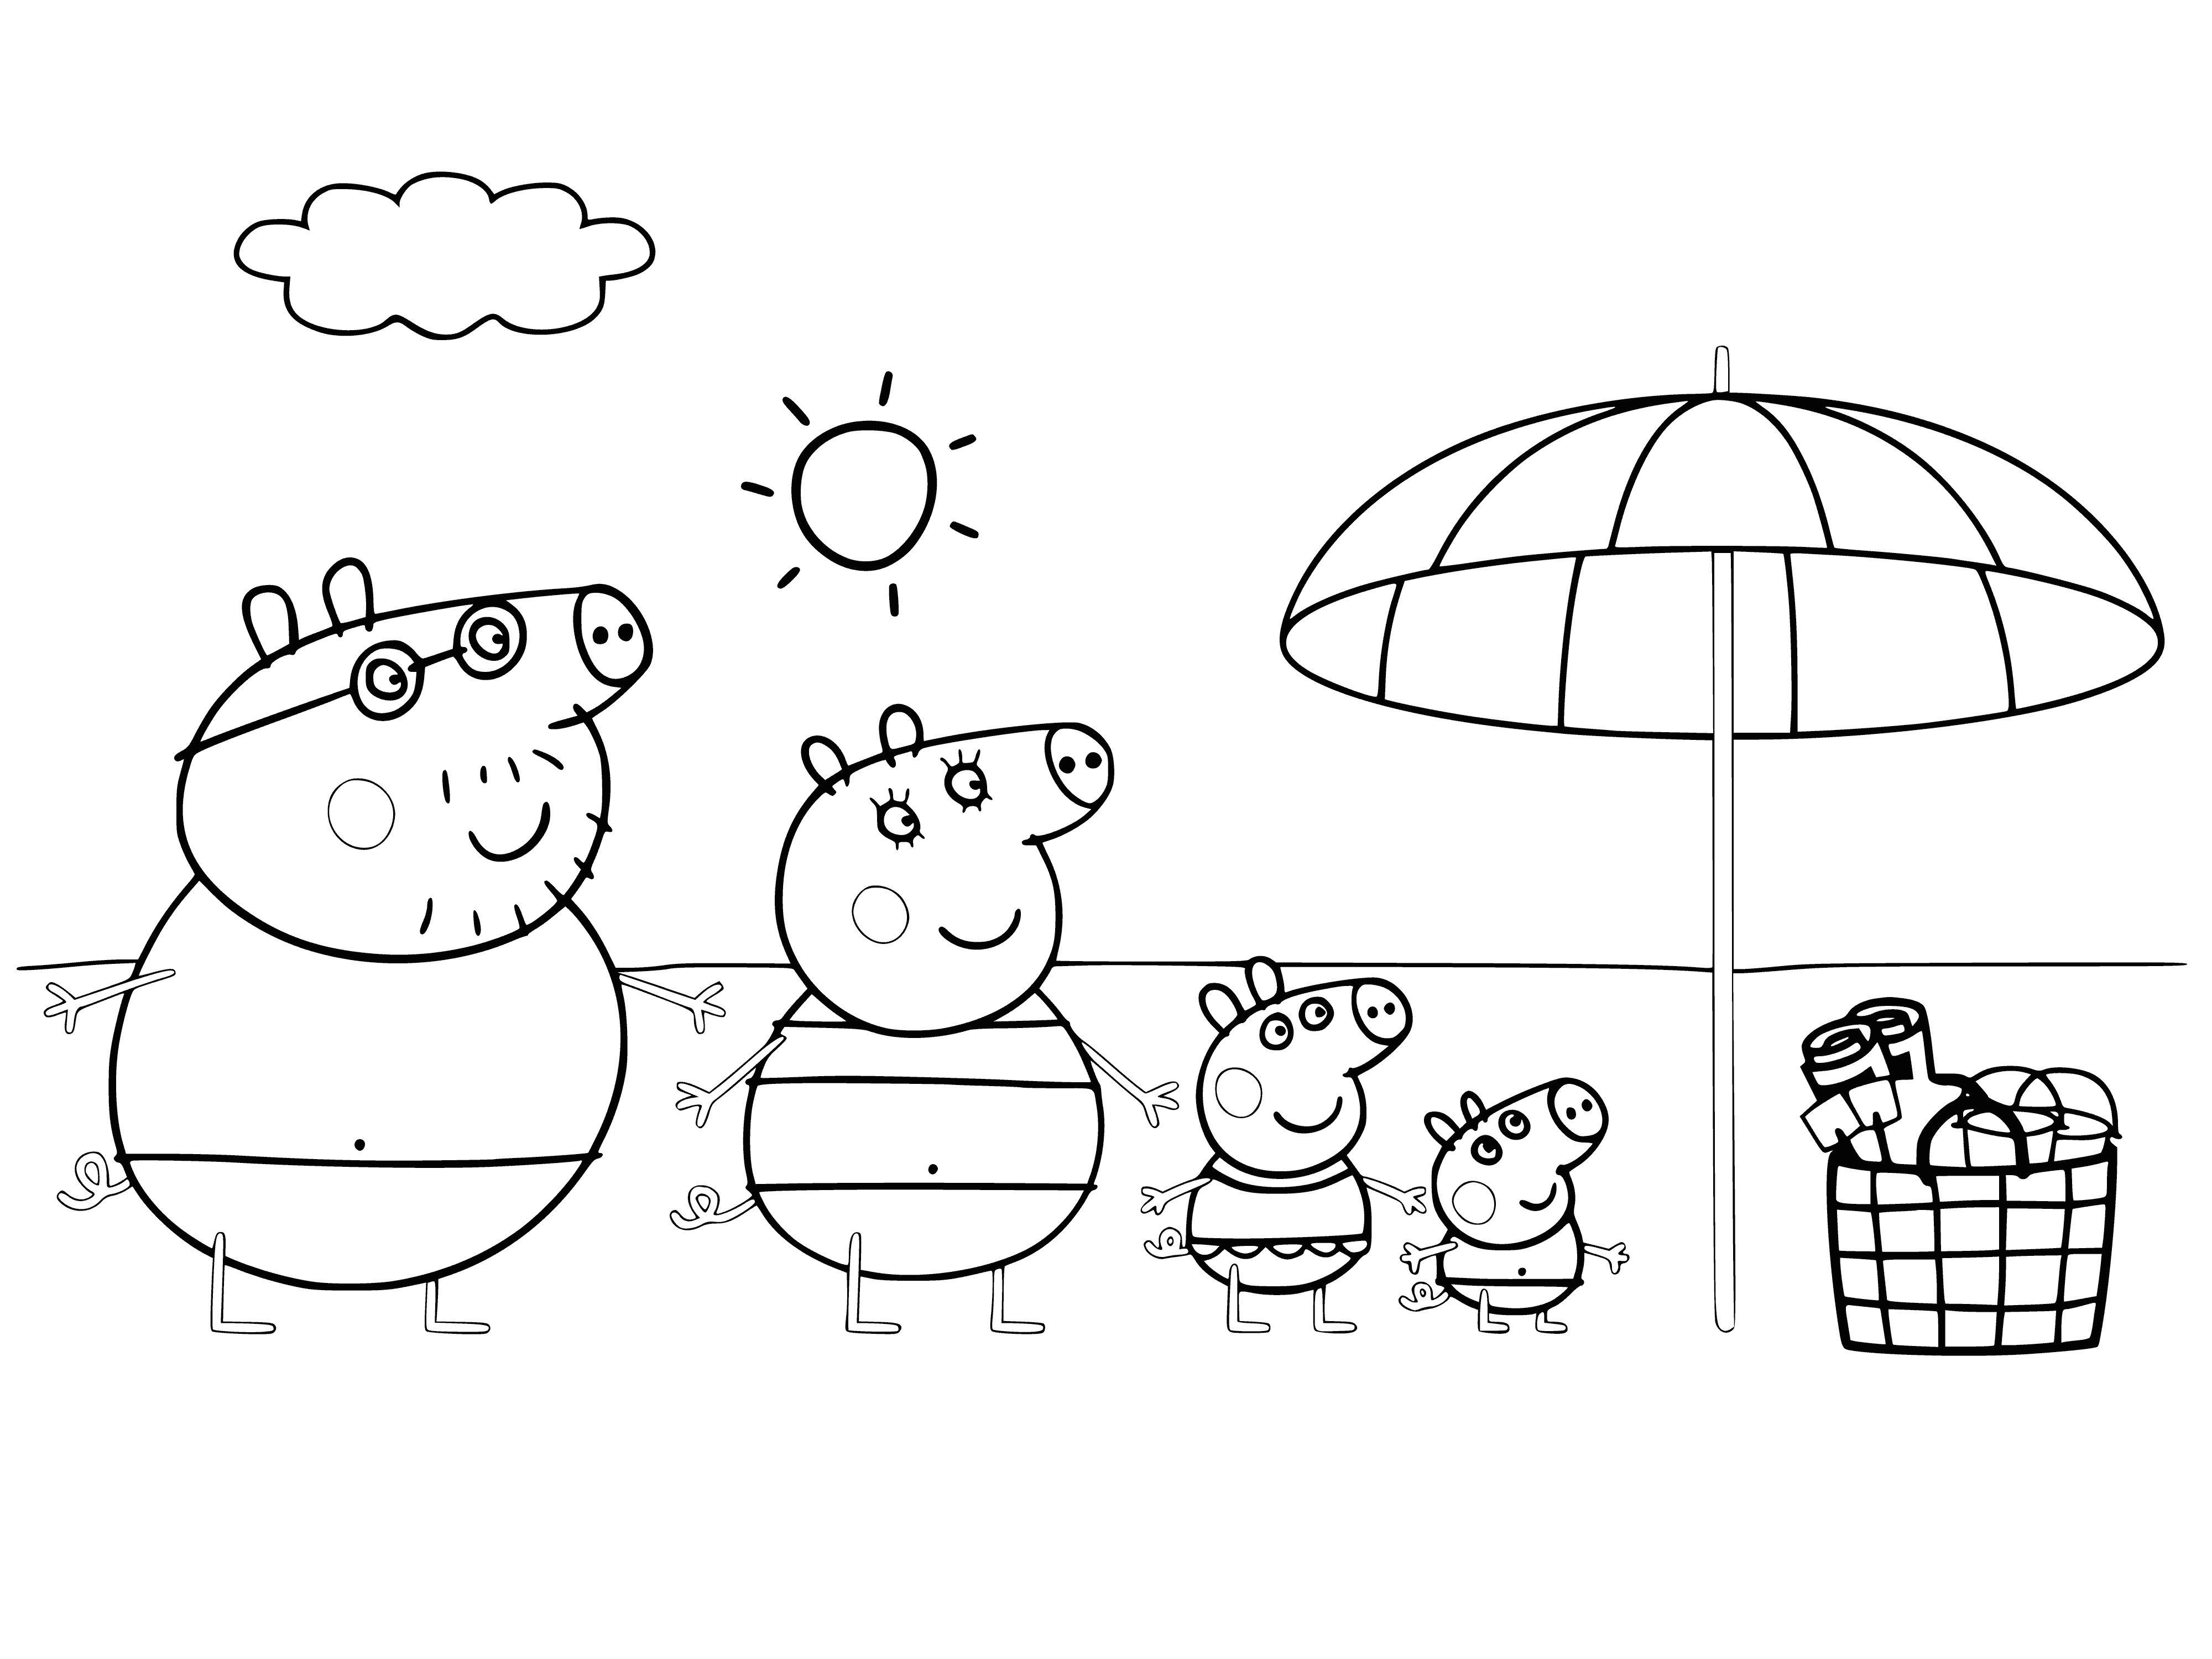 coloring page: Family of pigs playing in the sand on the beach, wearing swimsuits & sunglasses. Piglets building a sandcastle!